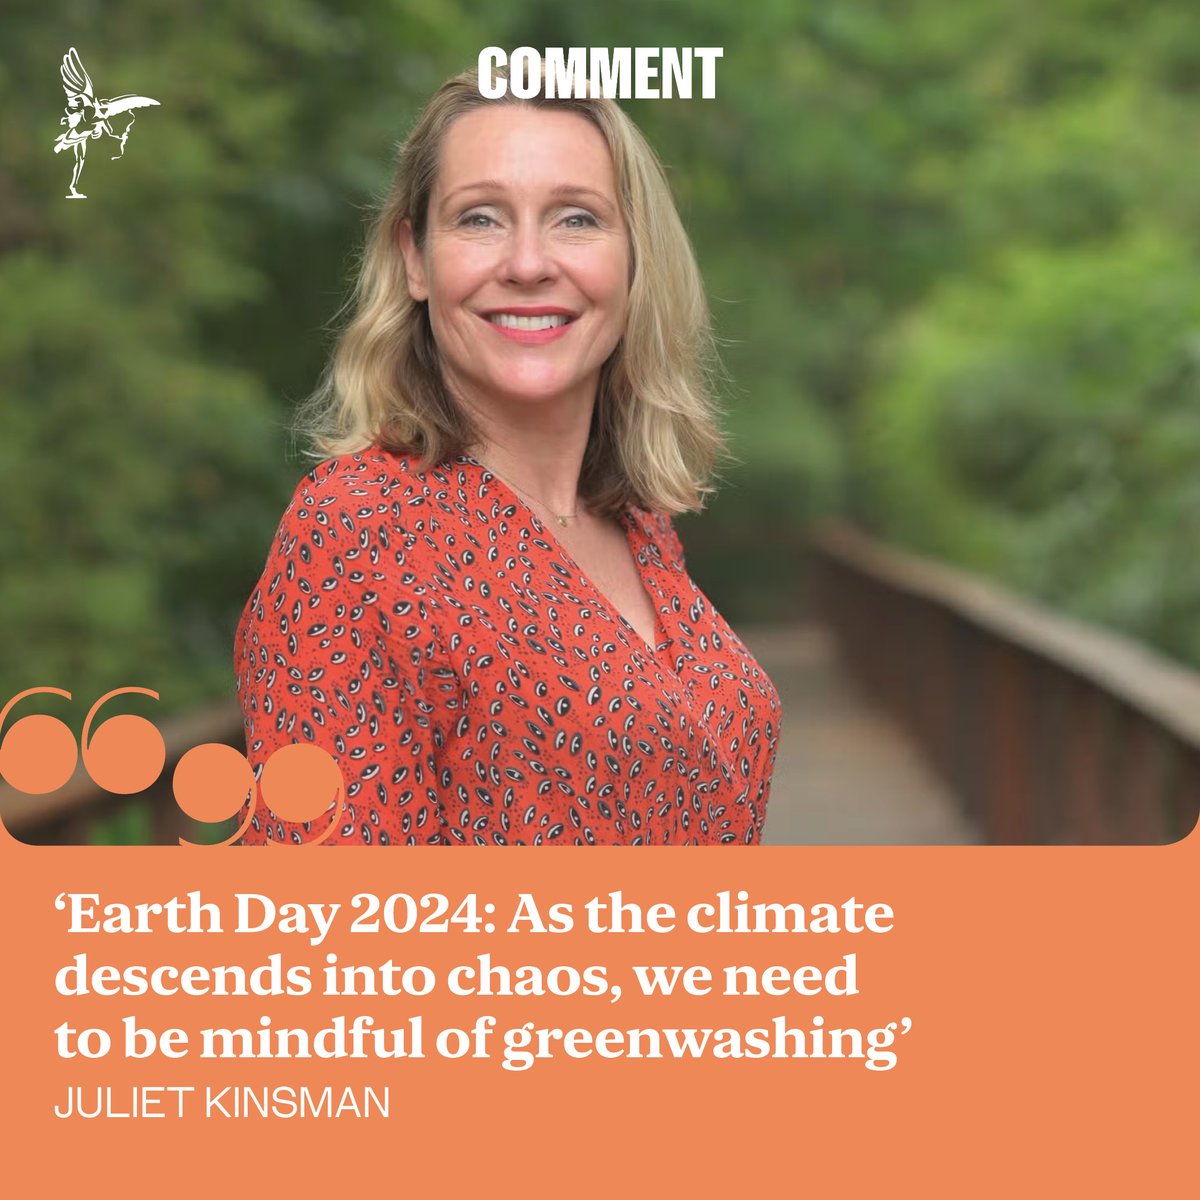 'Is Earth Day mostly taken up with virtue-signalling brands hopping on the bandwagon?' asks @JulietKinsman Read more: standard.co.uk/comment/earth-…